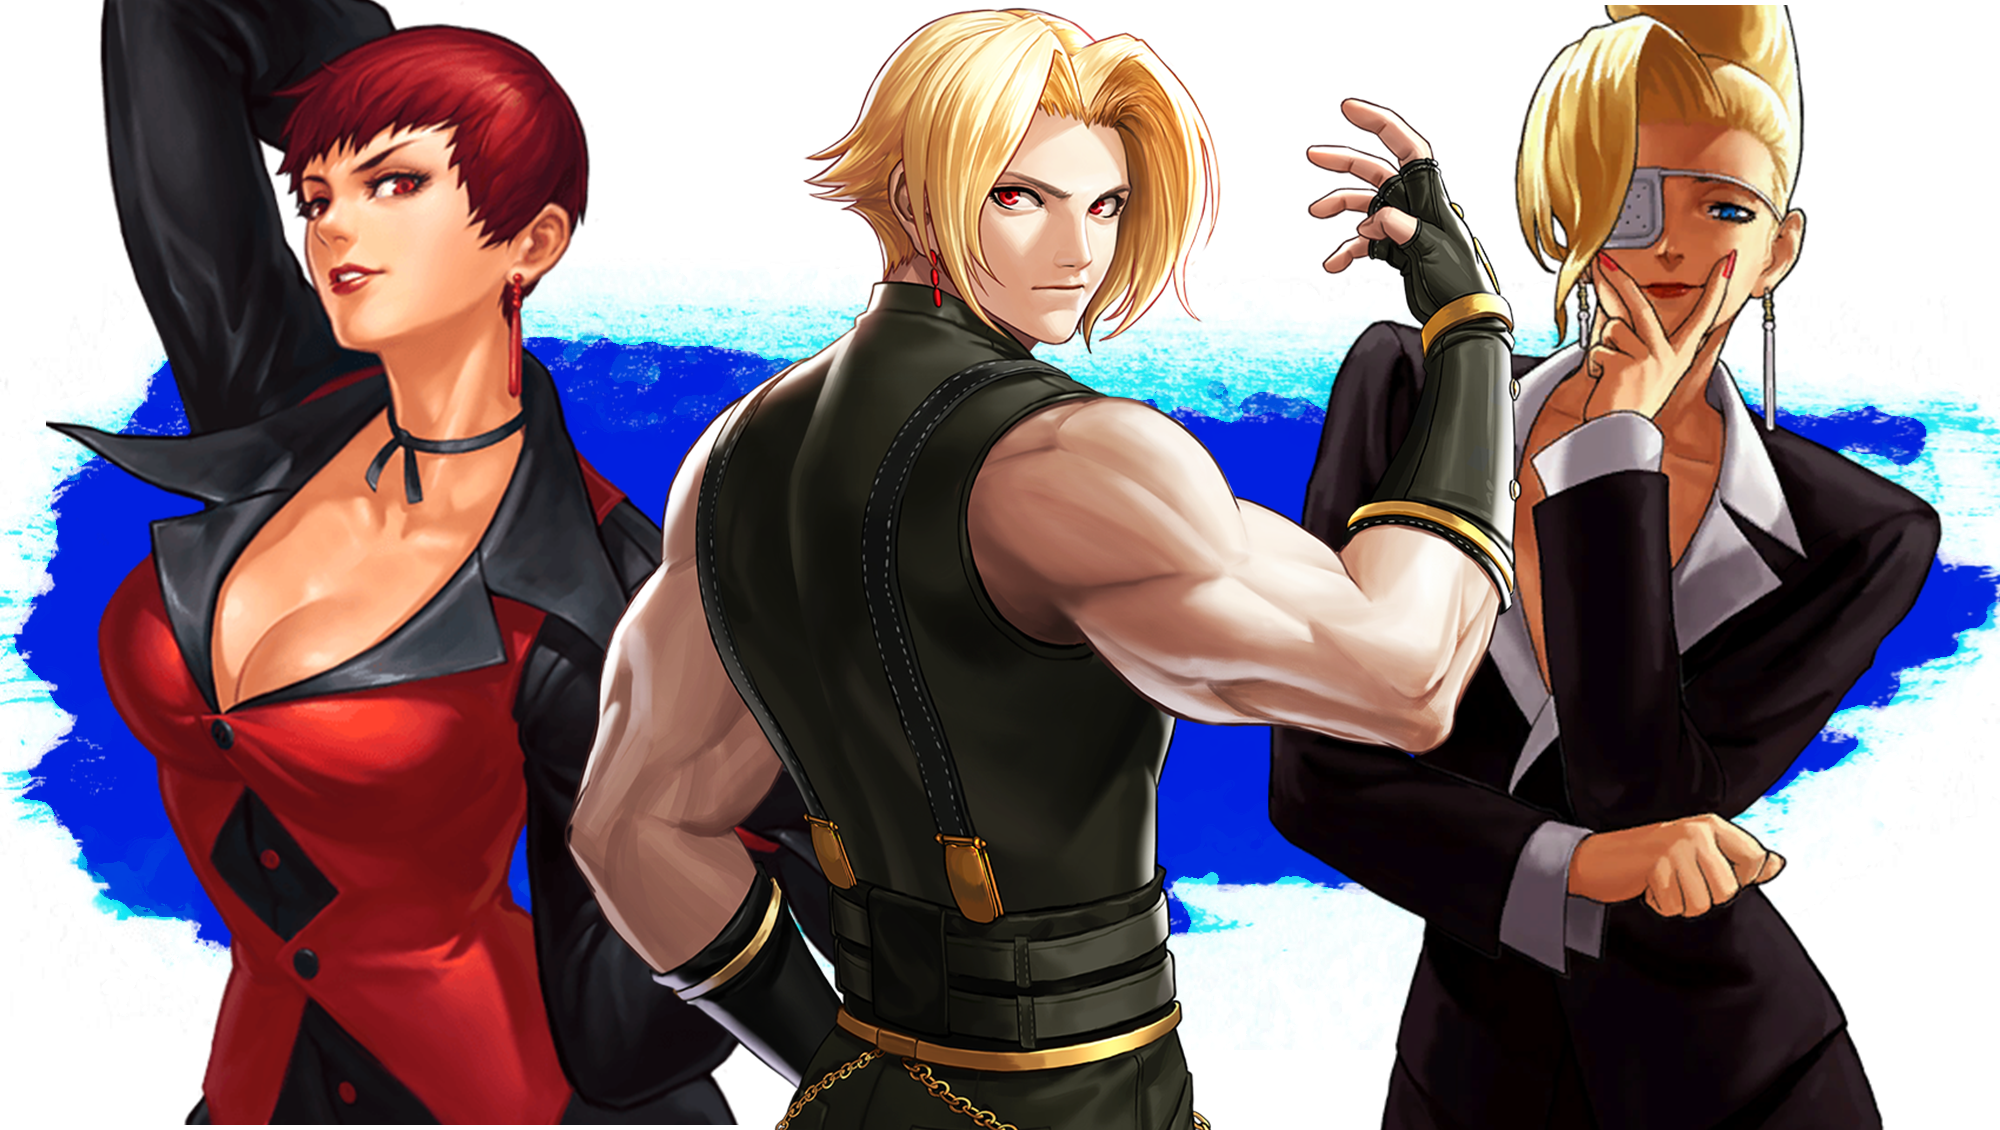 Capcom vs. SNK's spirit is alive with tons of action and callbacks